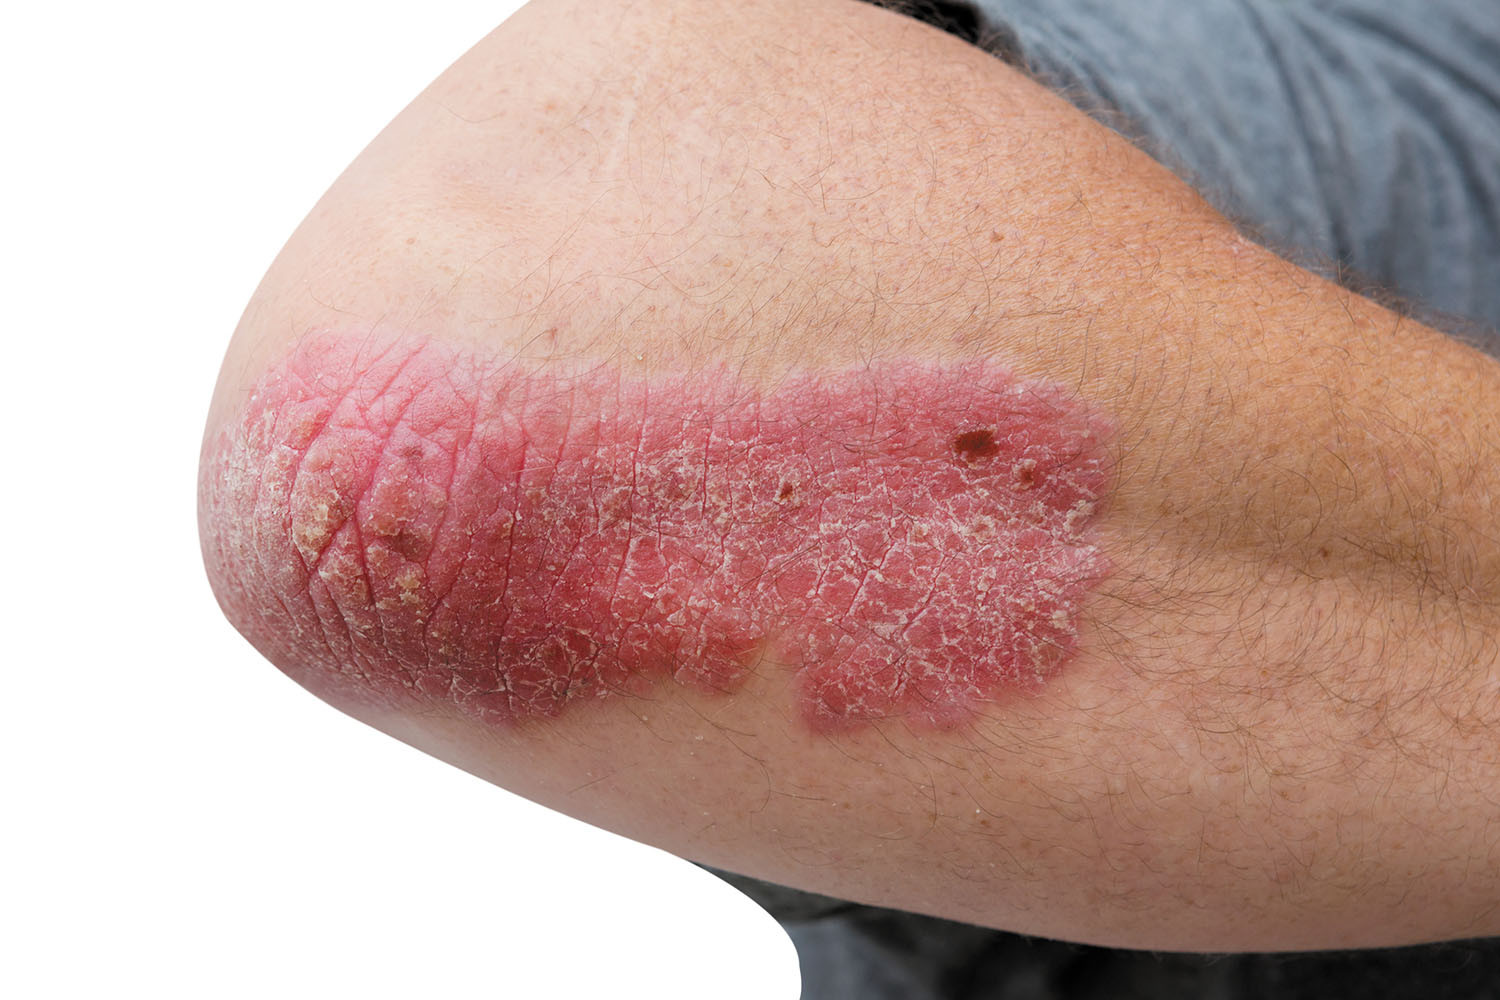 close-up photo of a man's elbow showing a psoriasis outbreak as a red, scaly area